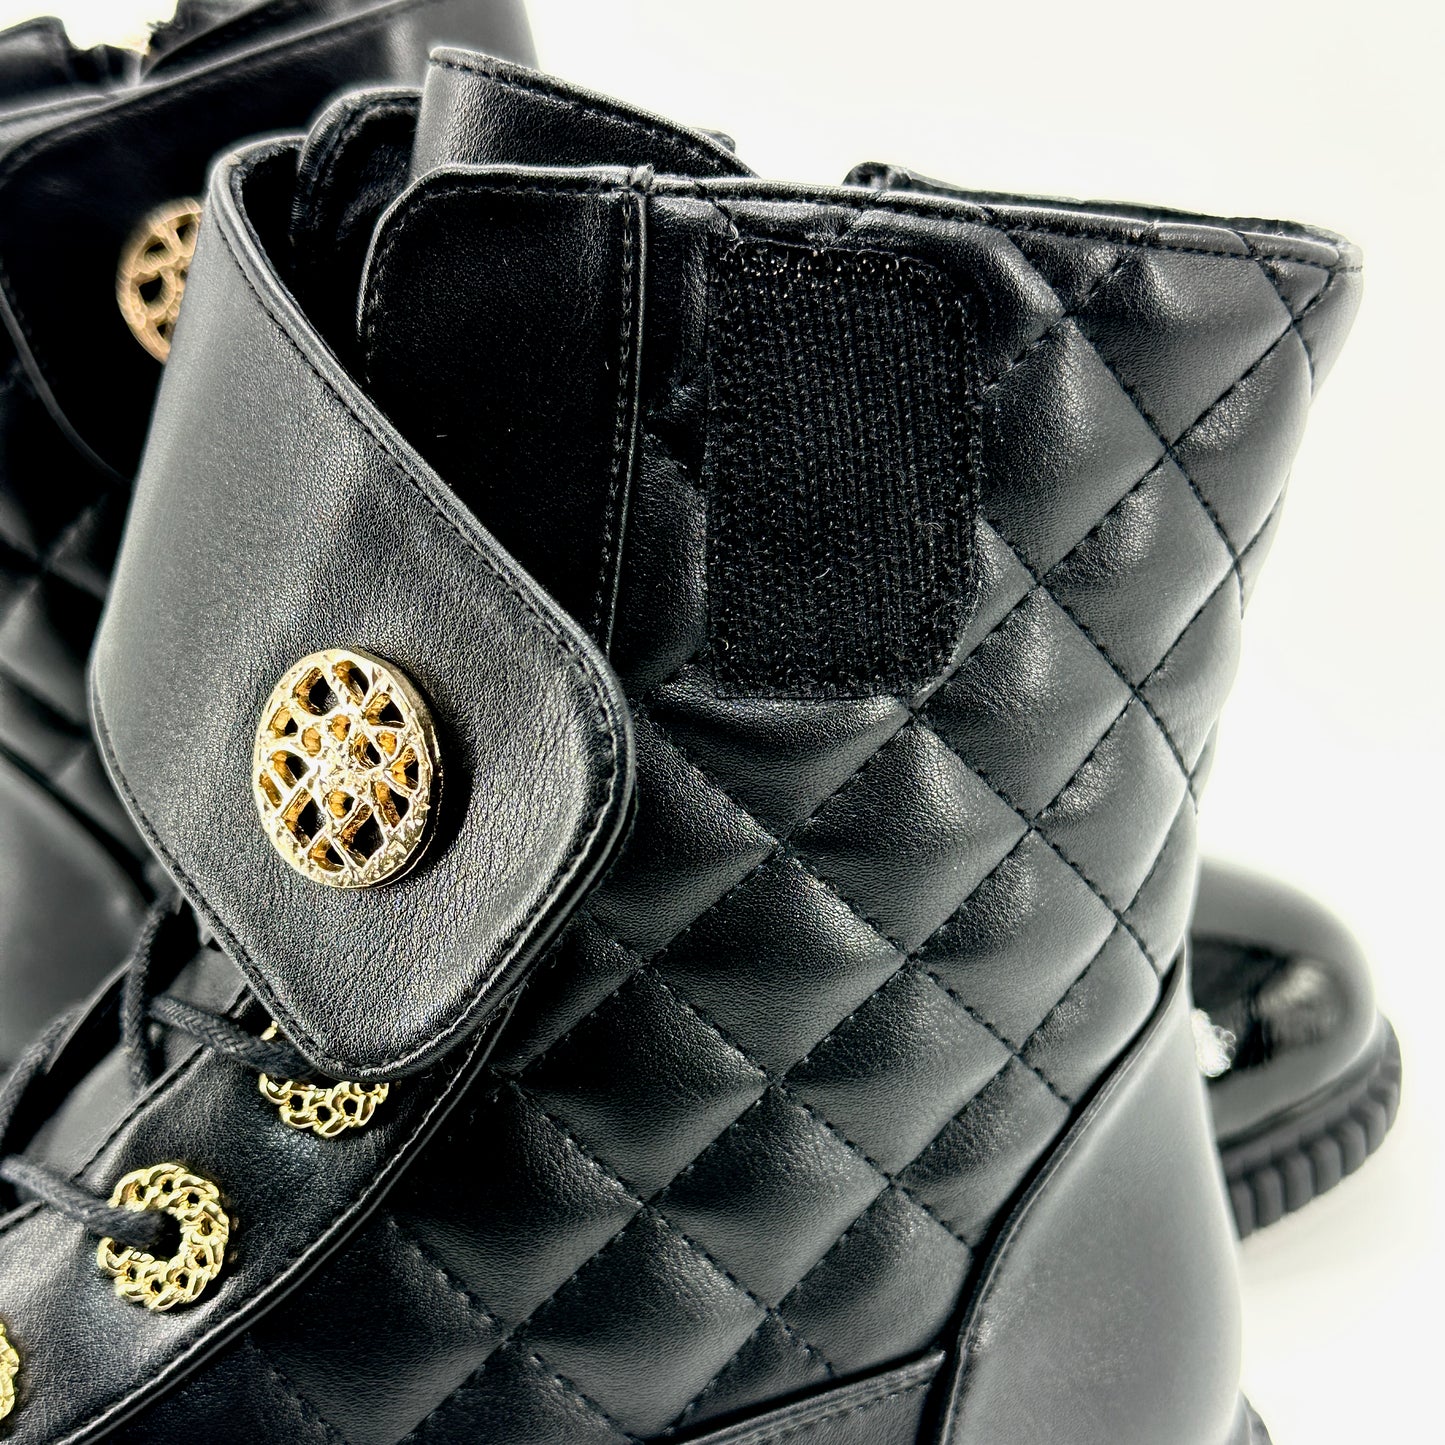 Couture Quilted Boot - Black